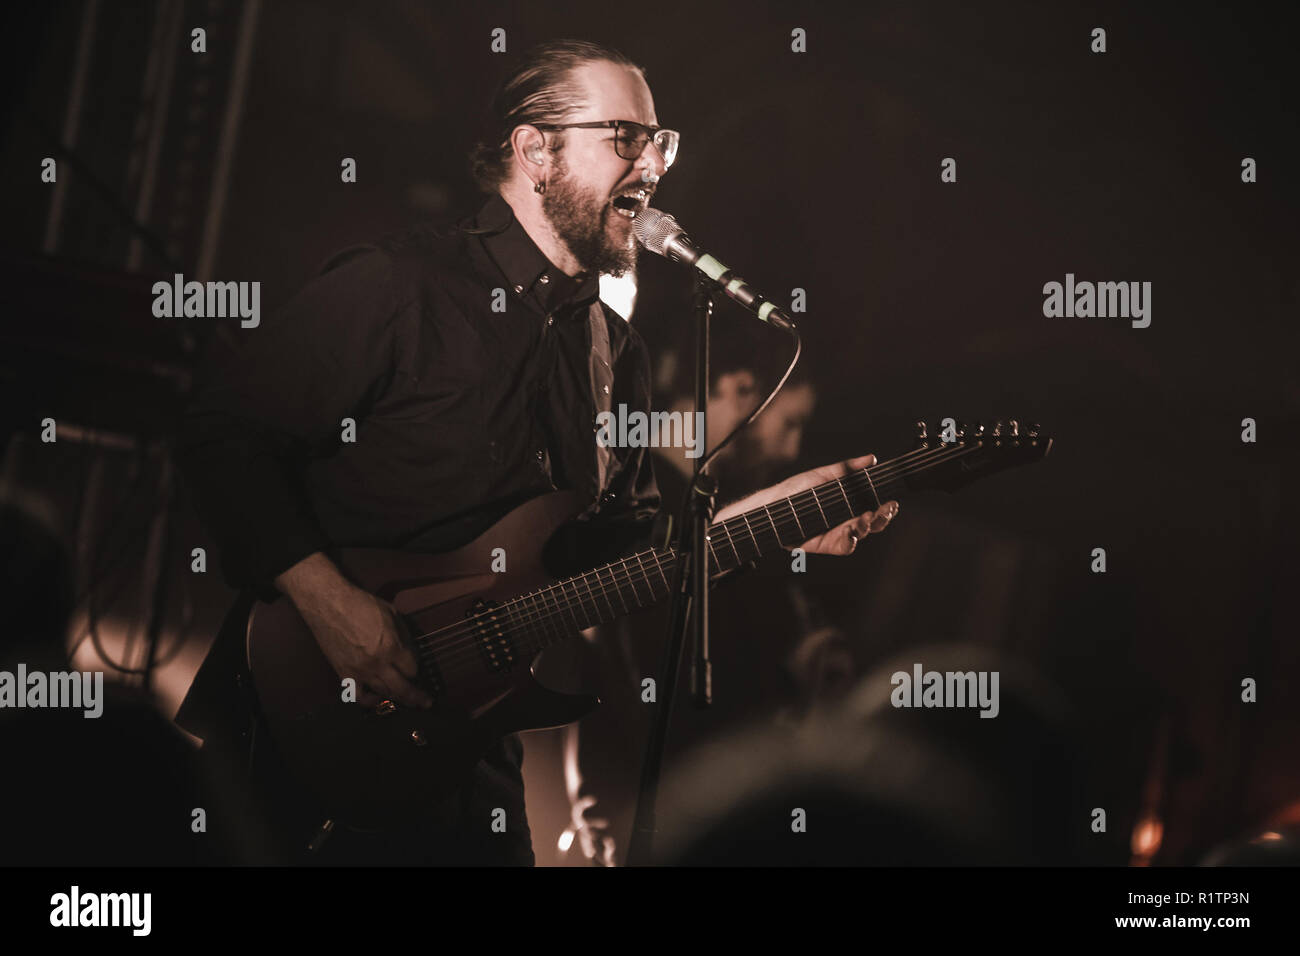 Wroclaw, Poland. 13th Nov, 2018. Vegard Sverre Tveitan (Ihsahn) - he  performed in Wroclaw. Legend of metal music - founder of the legendary  group Emperor promoted his solo album. Credit: Krzysztof Zatycki/Pacific